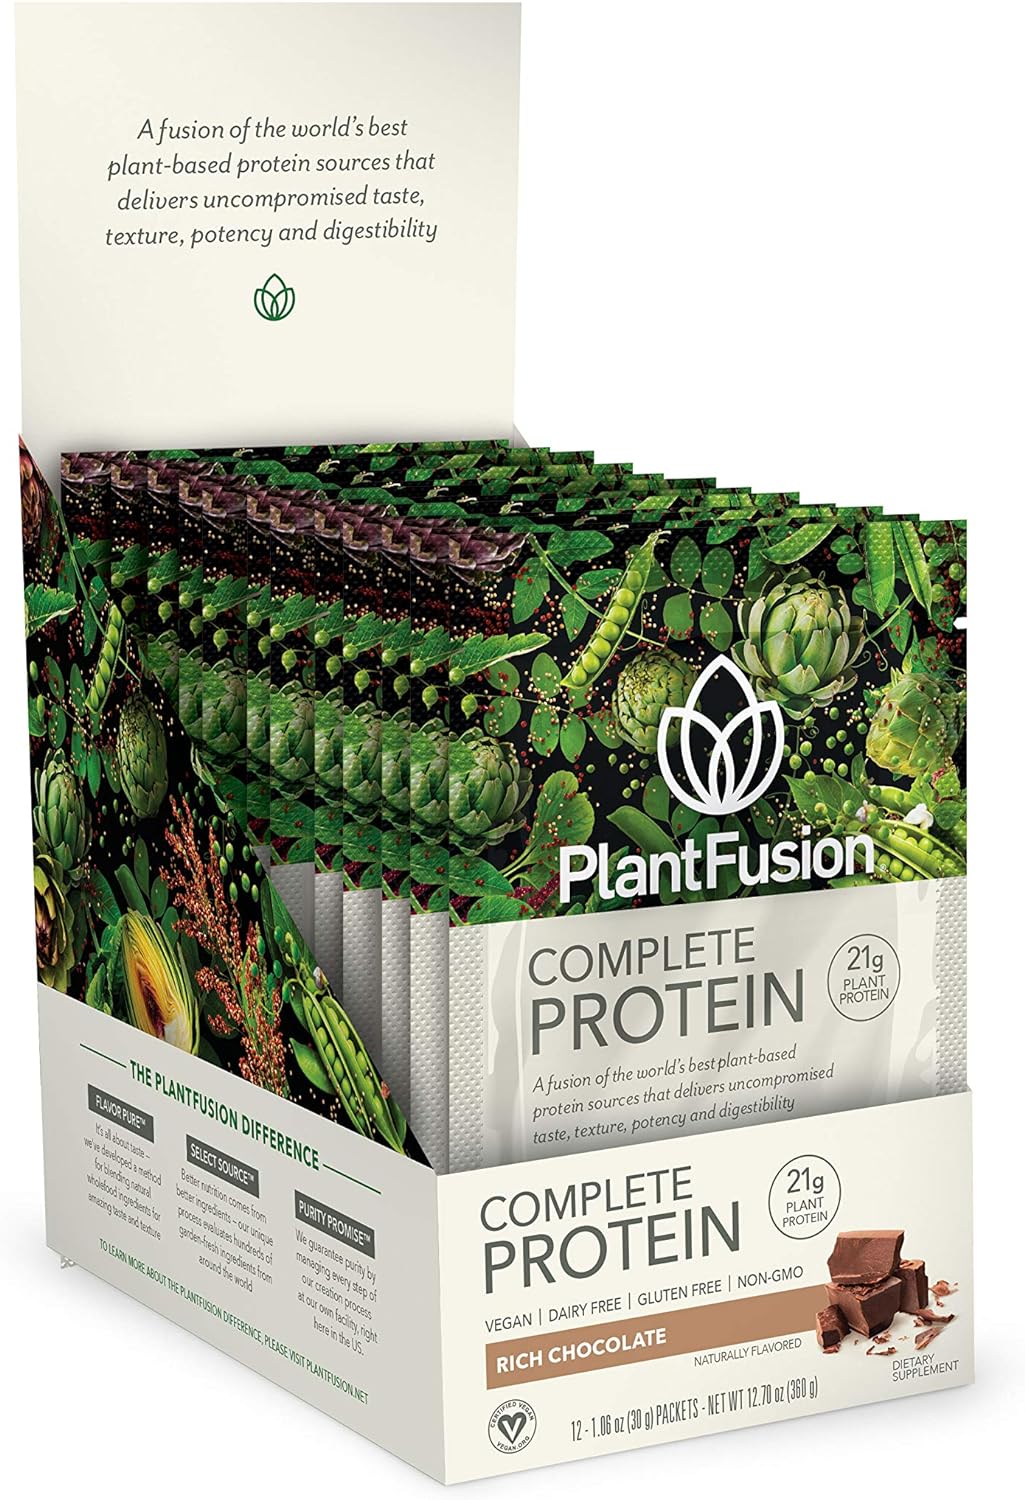 PlantFusion Complete Vegan Protein Powder - Plant Based Protein Powder with BCAAs, Digestive Enzymes and Pea Protein - Keto, Gluten Free, Soy Free, Non-Dairy, No Sugar, Non-GMO - Chocolate Pack of 12